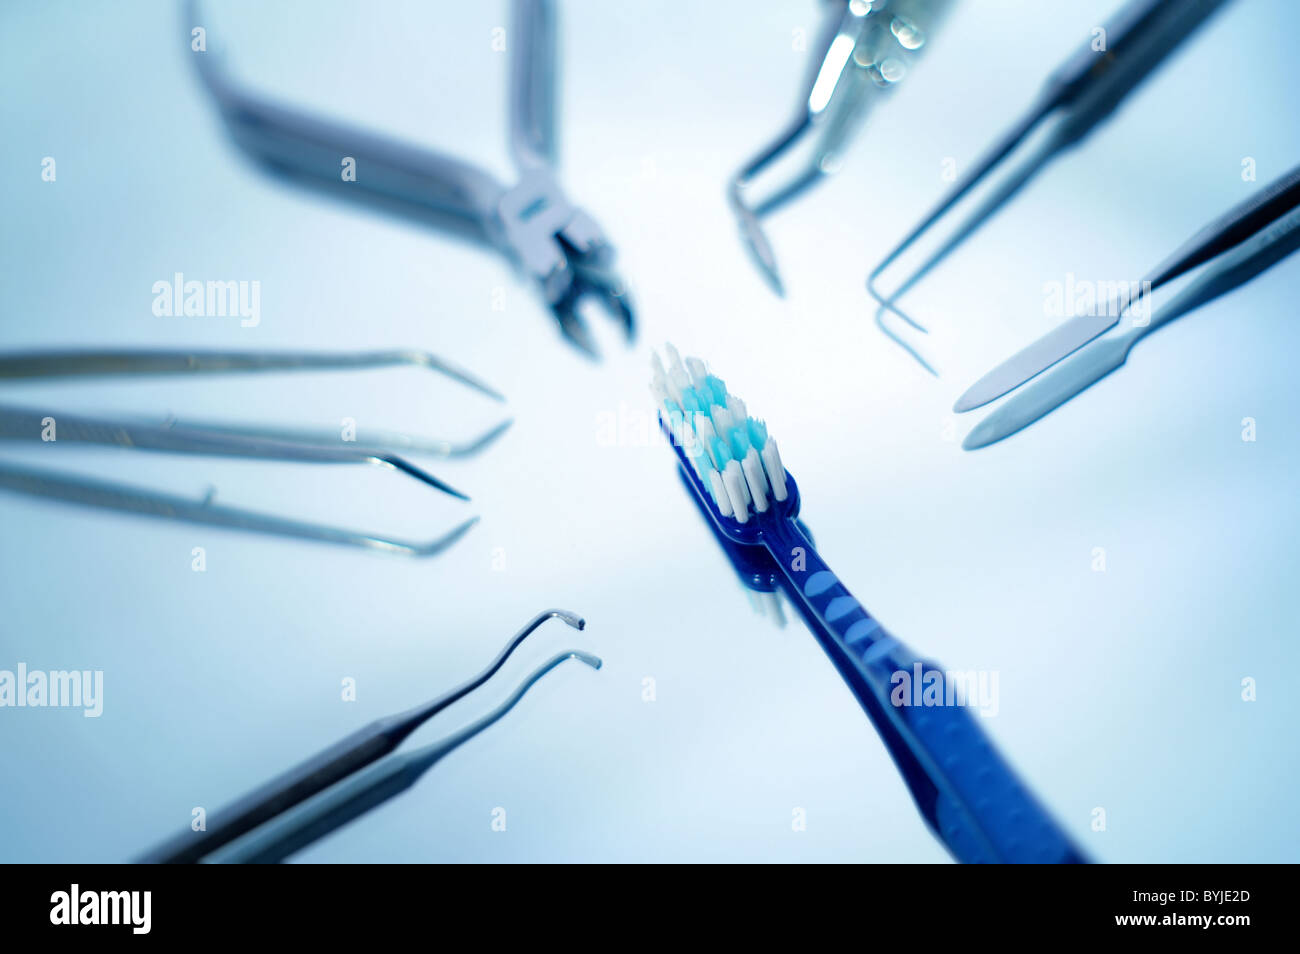 Toothbrush surrounded by dental instruments with very shallow depth of field Stock Photo